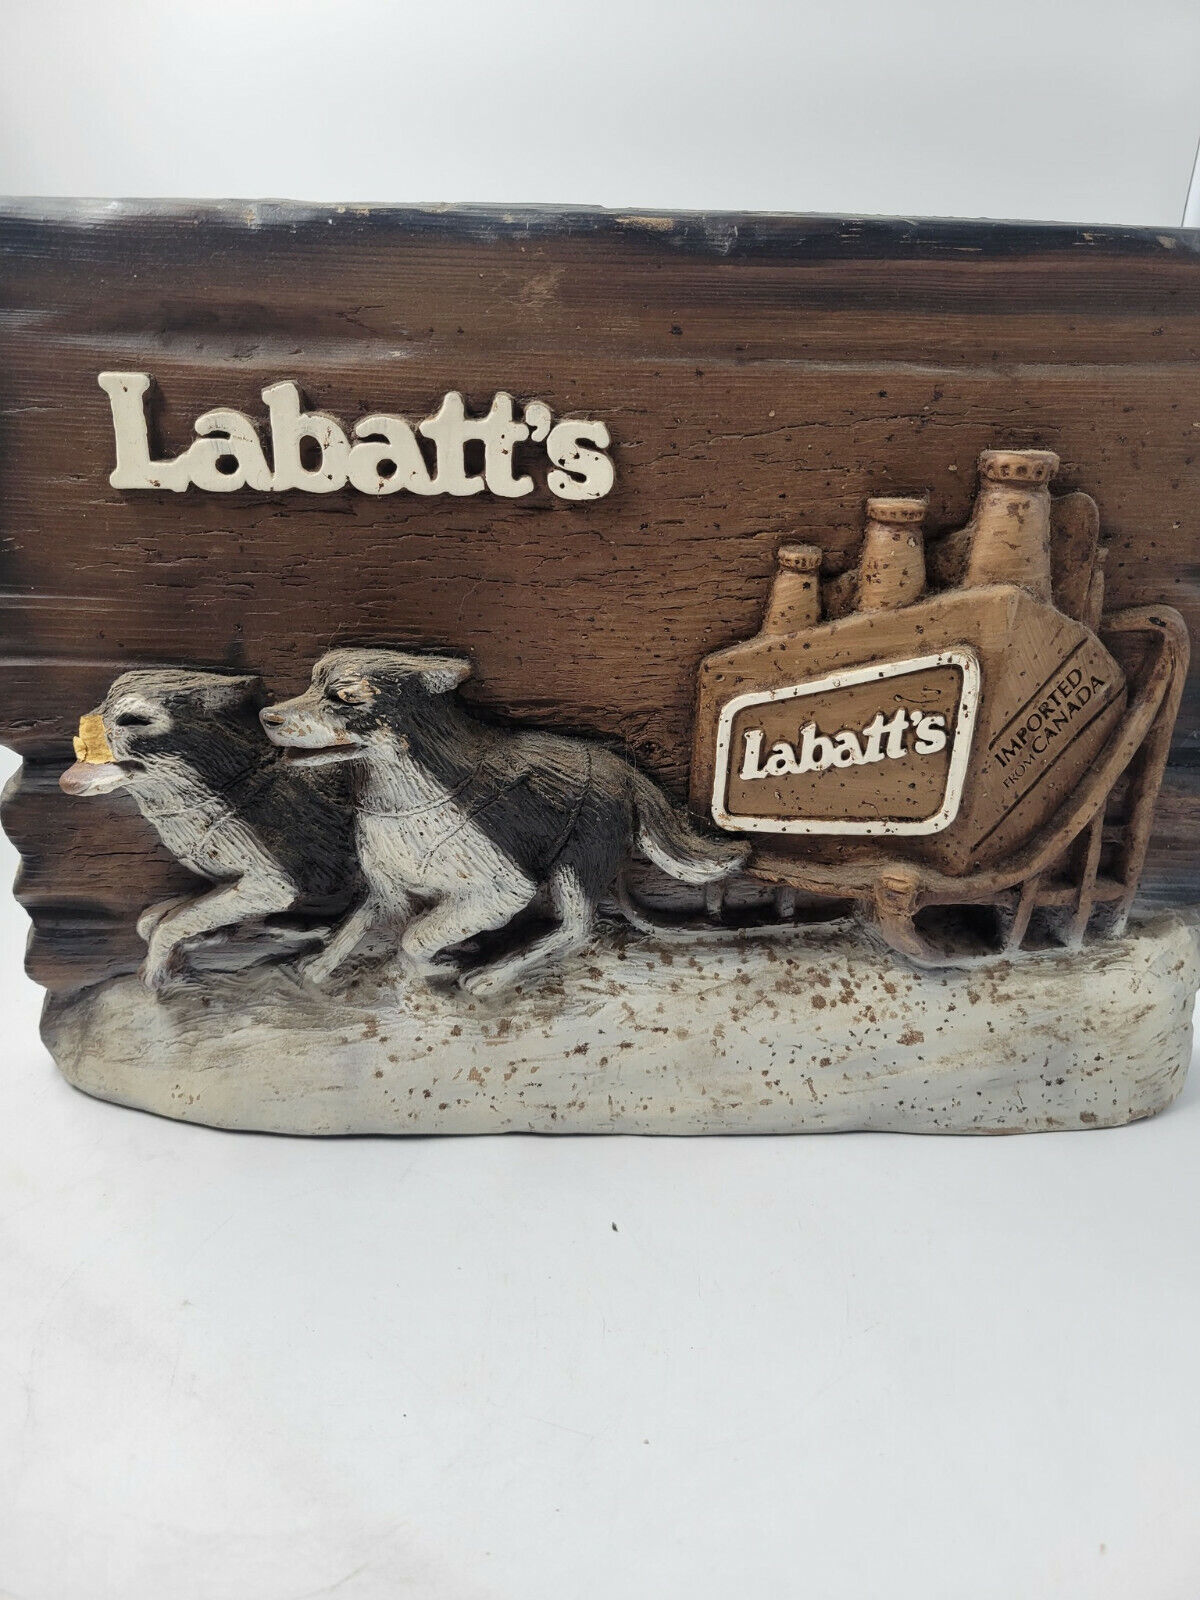 Labatt’s Beer Sign Thick Foam Husky Dogs with Sled 1981 Vintage 3D READ